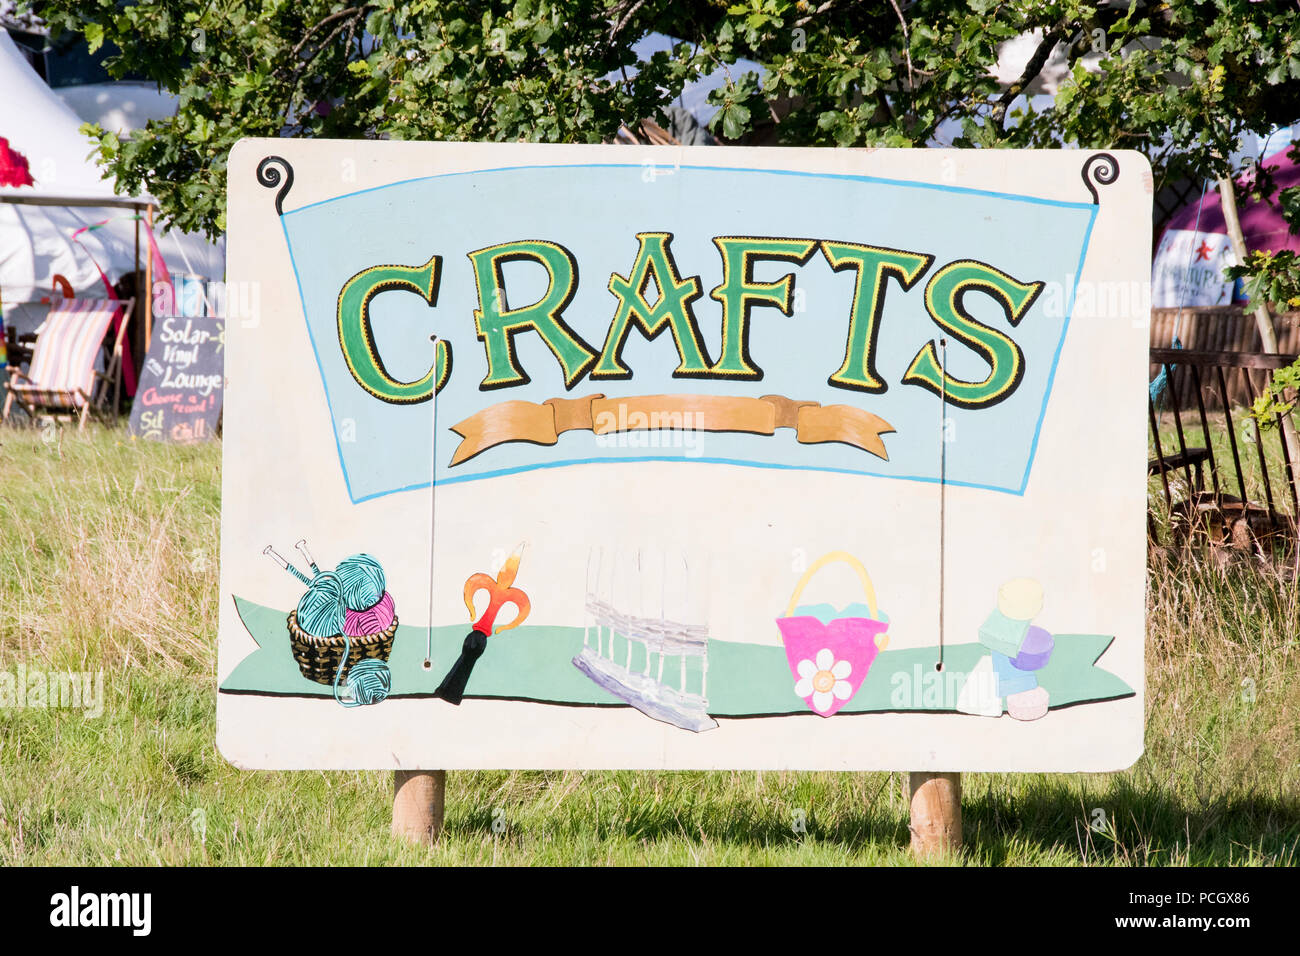 Chepstow, Wales – Aug 14: Colourful festival sign for the Crafts area 14 Aug 2015 at the Green Gathering Festivalline Stock Photo